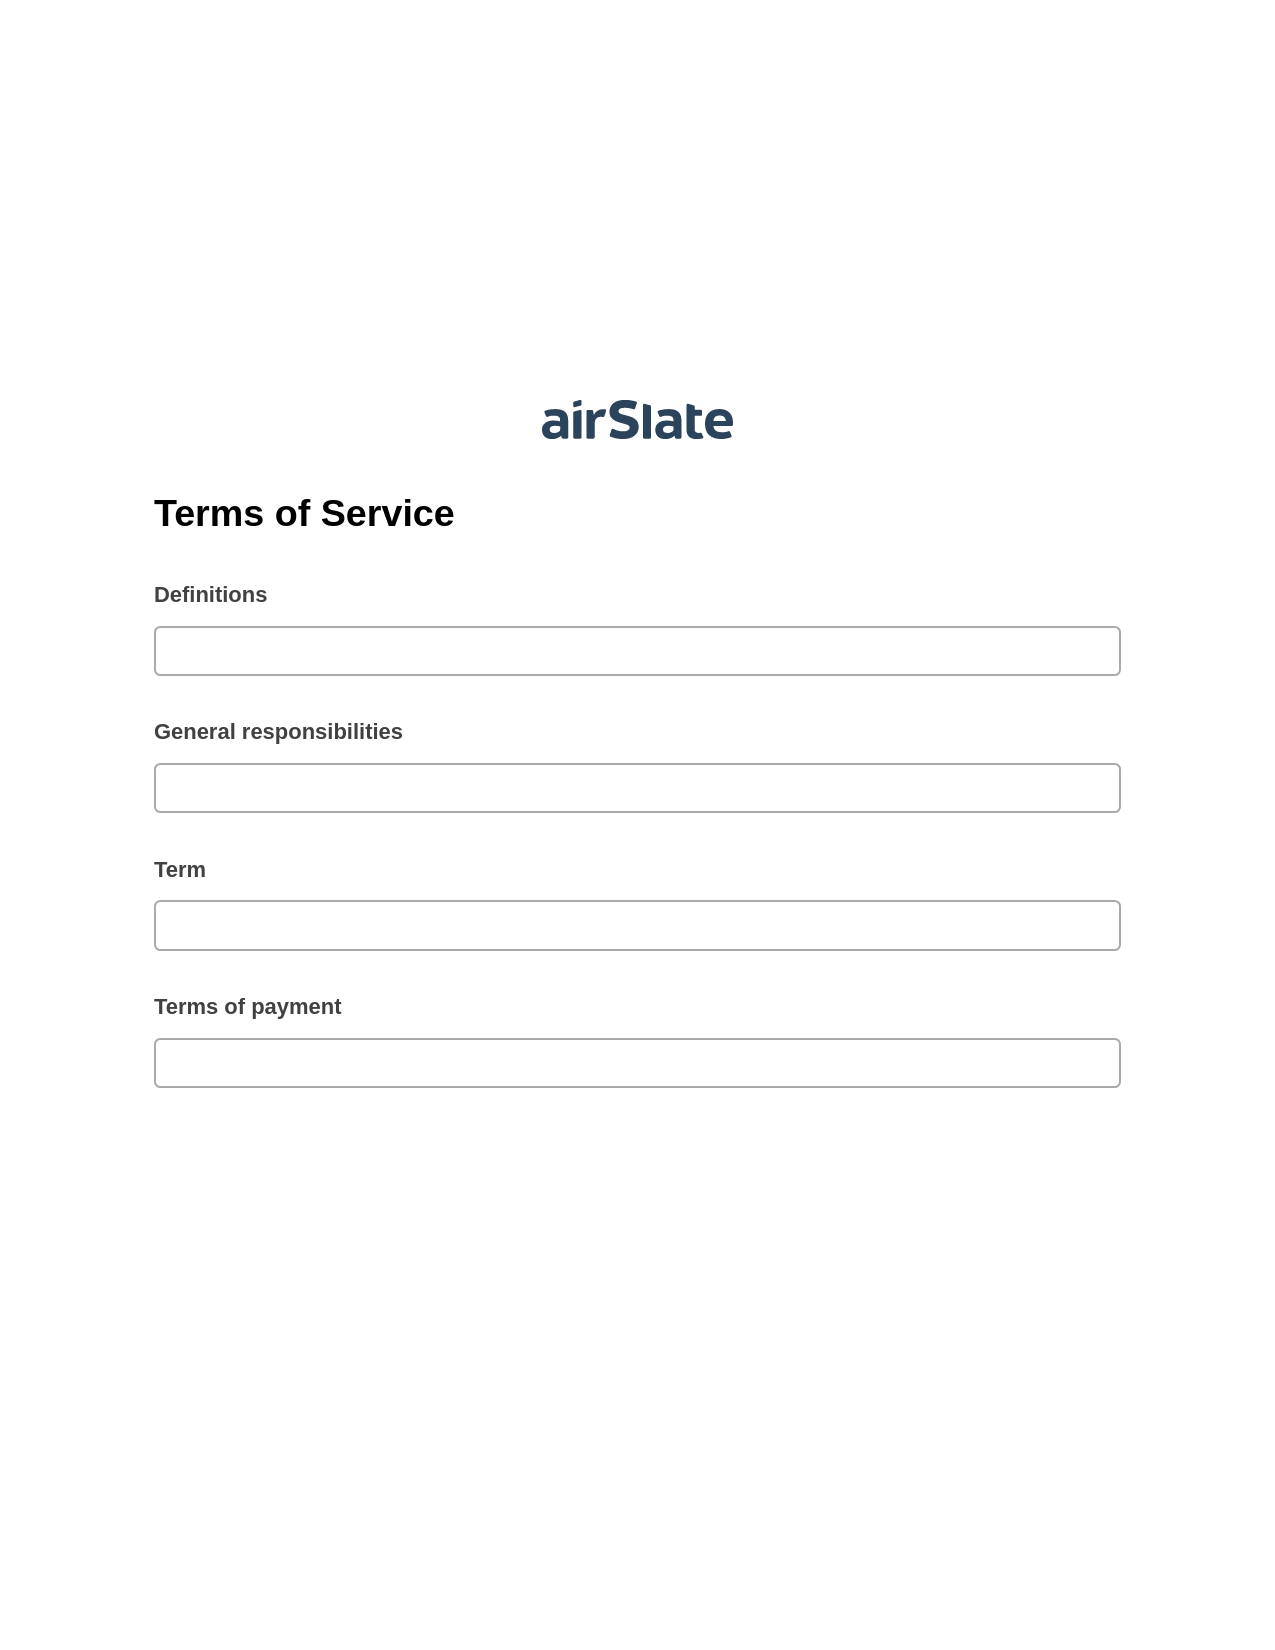 Terms of Service Pre-fill from Google Sheet Dropdown Options Bot, Remove Slate Bot, Dropbox Bot